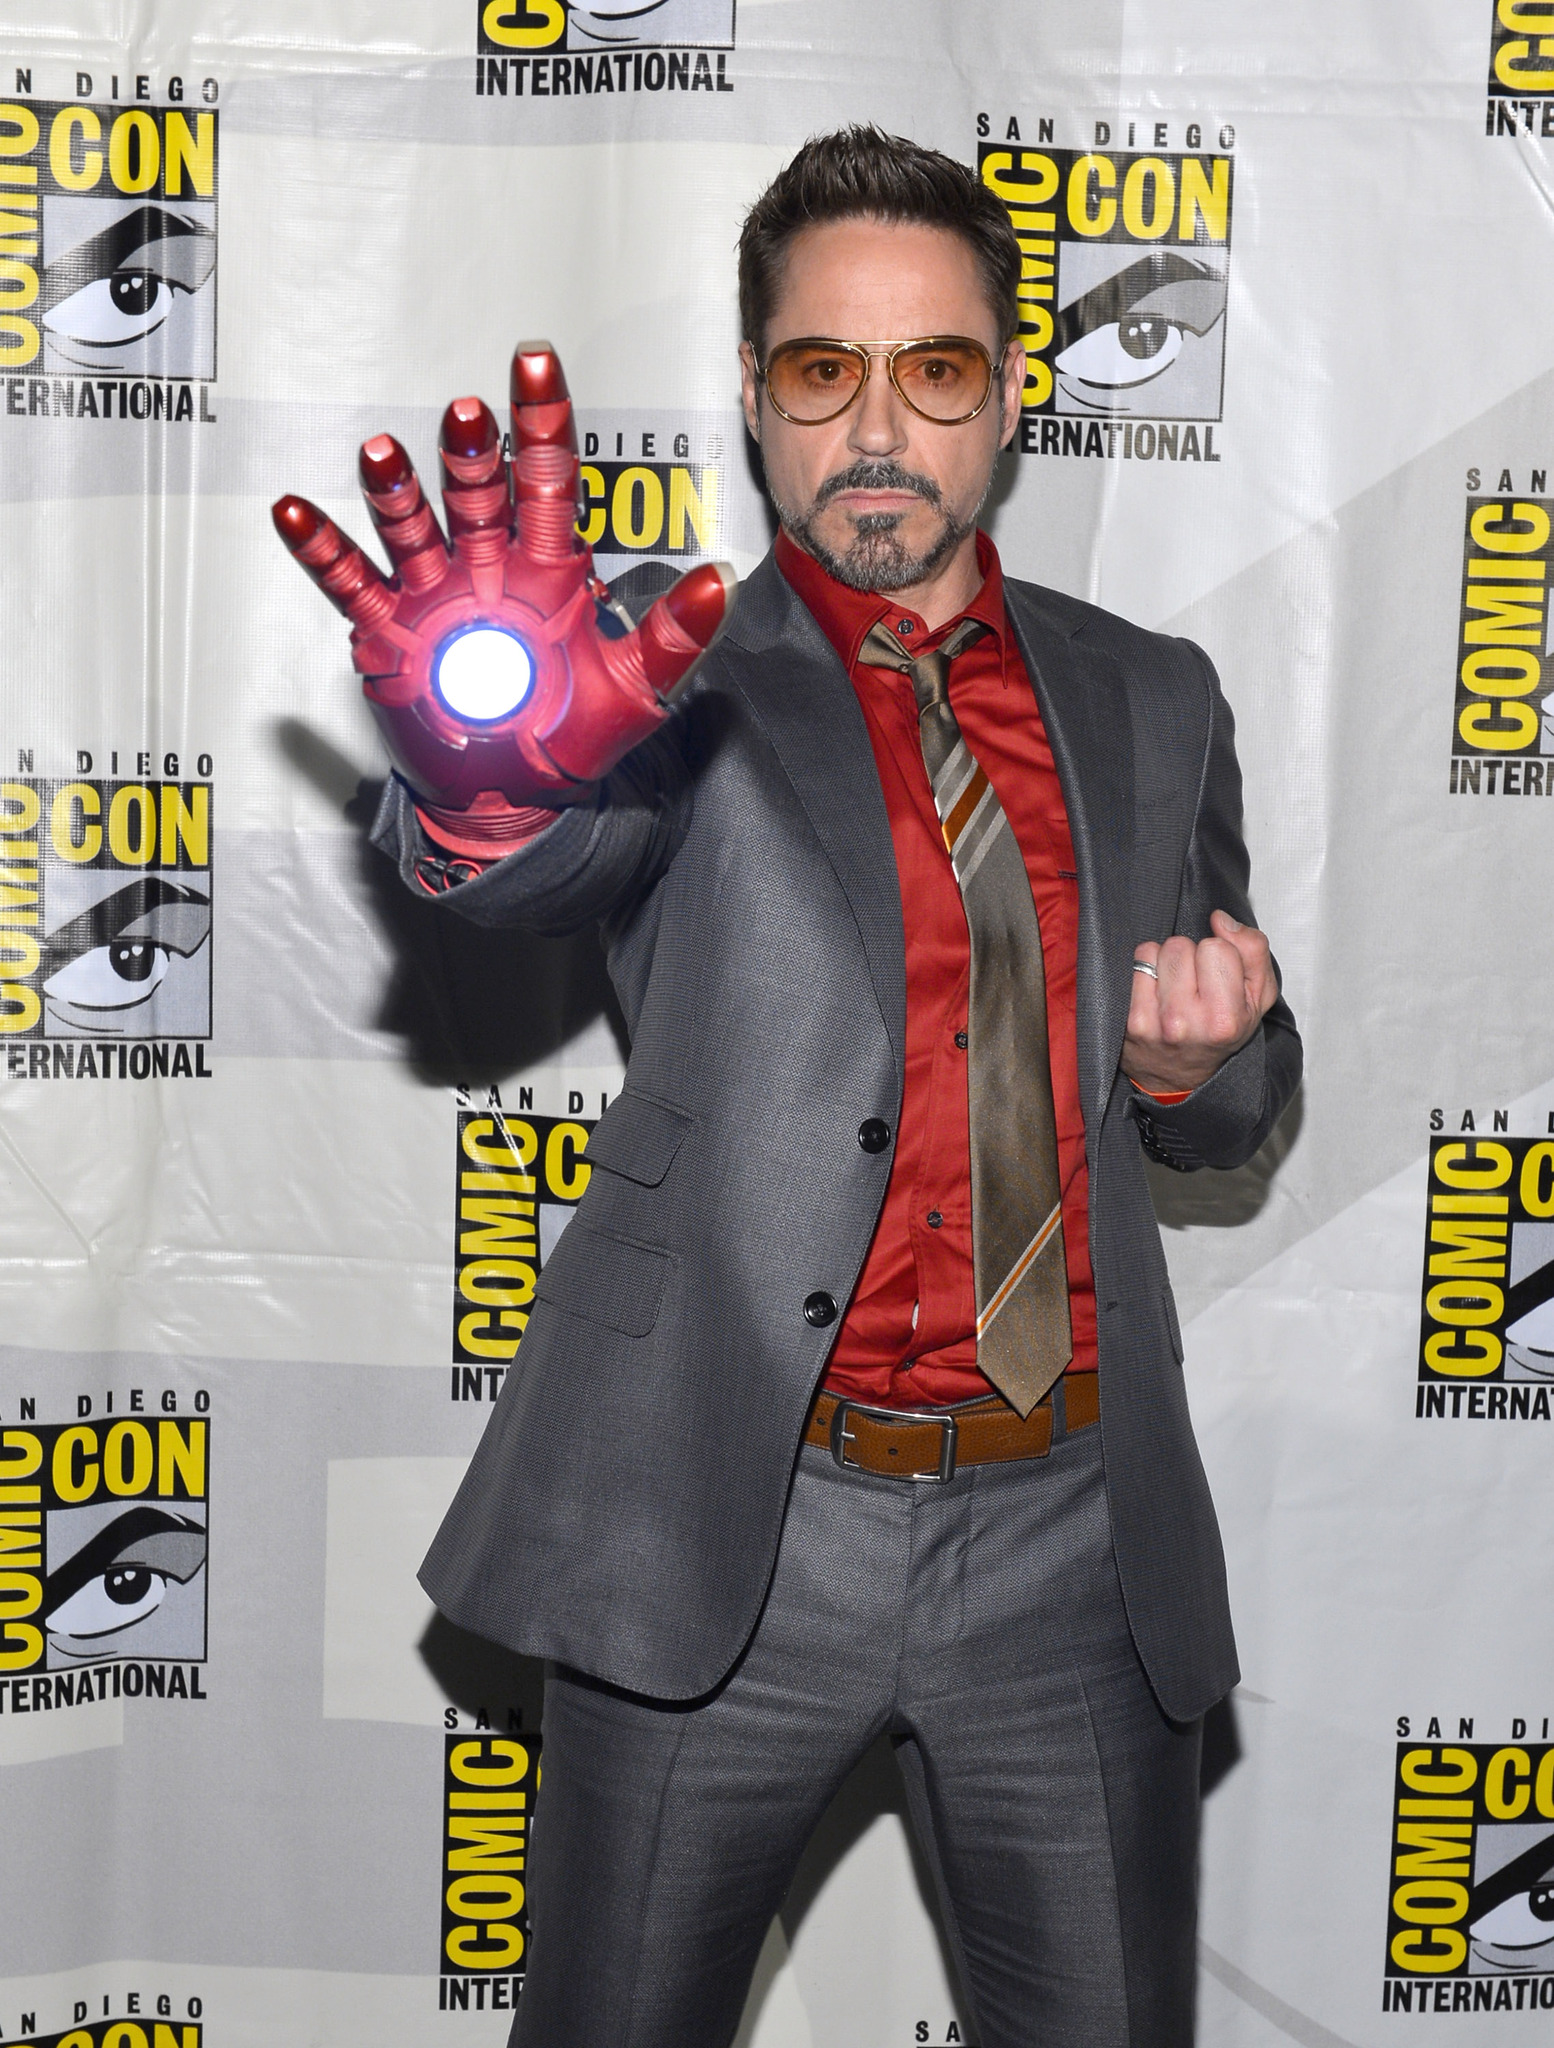 Robert Downey Jr. at event of Gelezinis zmogus 3 (2013)